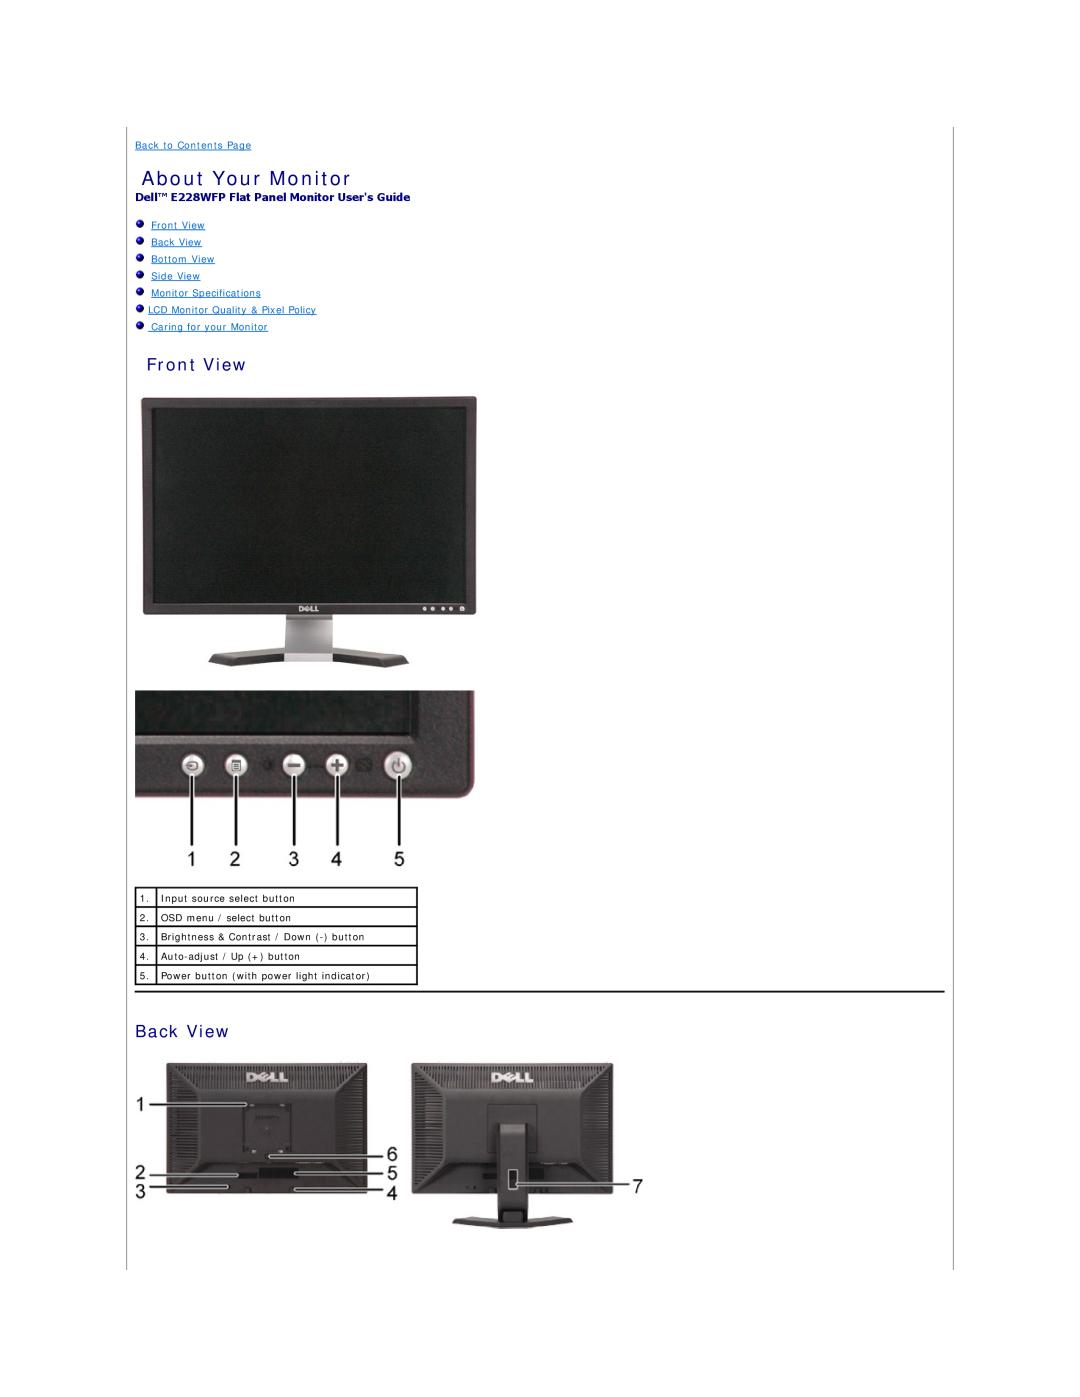 Dell About Your Monitor, Front View, Back View, Dell E228WFP Flat Panel Monitor Users Guide, Back to Contents Page 